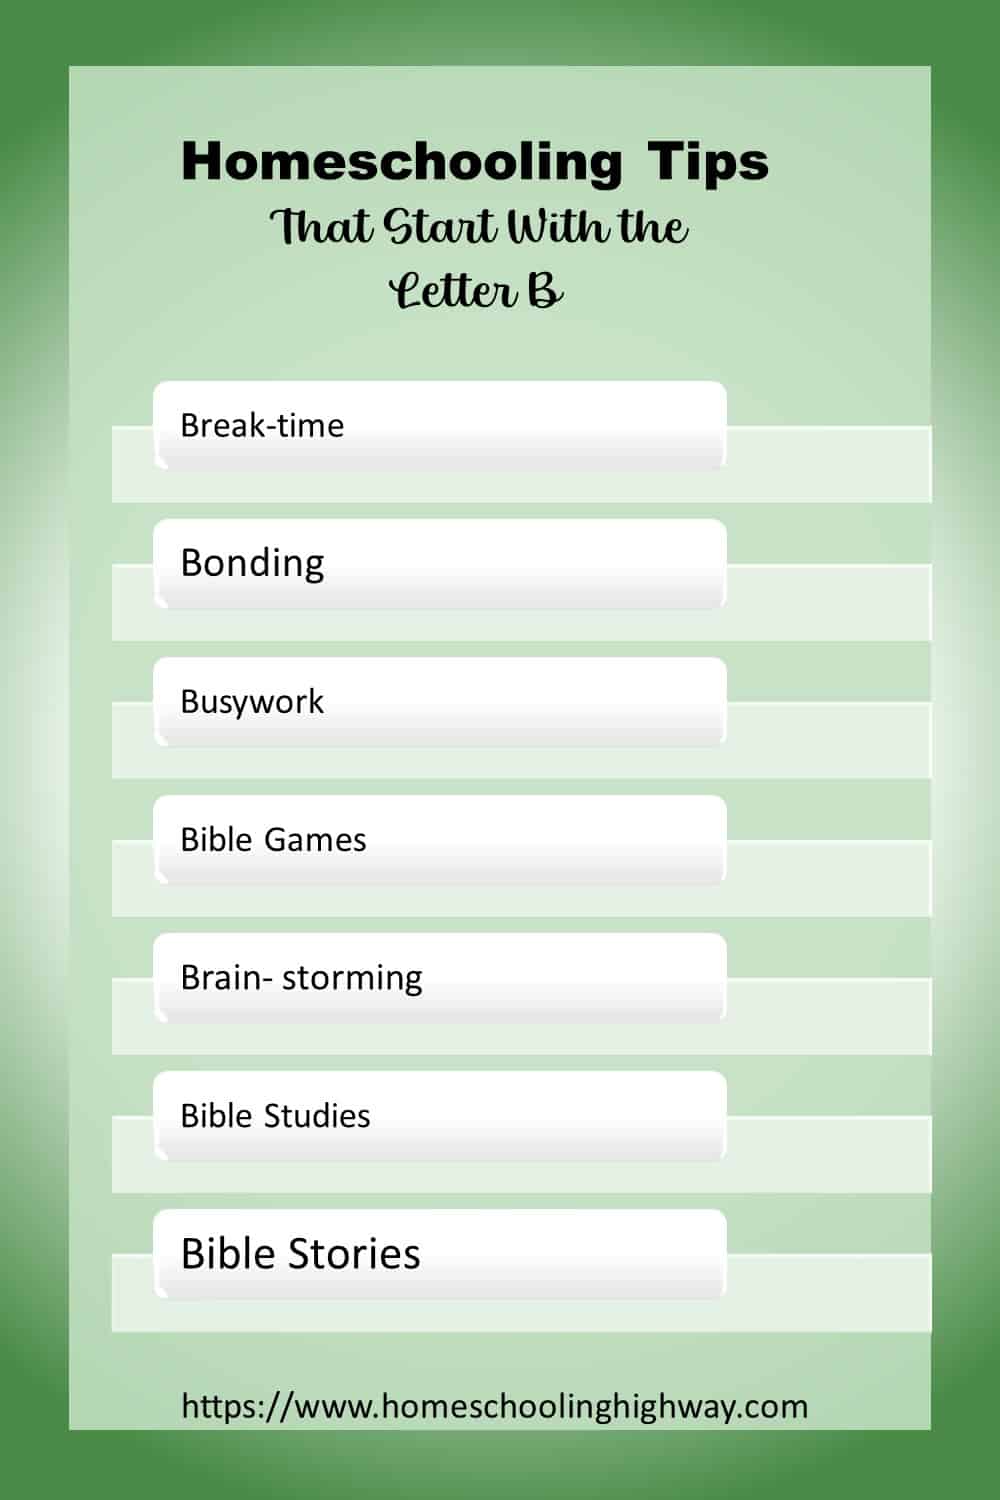 Homeschooling Tips That Start With B. Break time, Bonding, Busywork, Bible Games, Bible Stories, Bible Lessons,